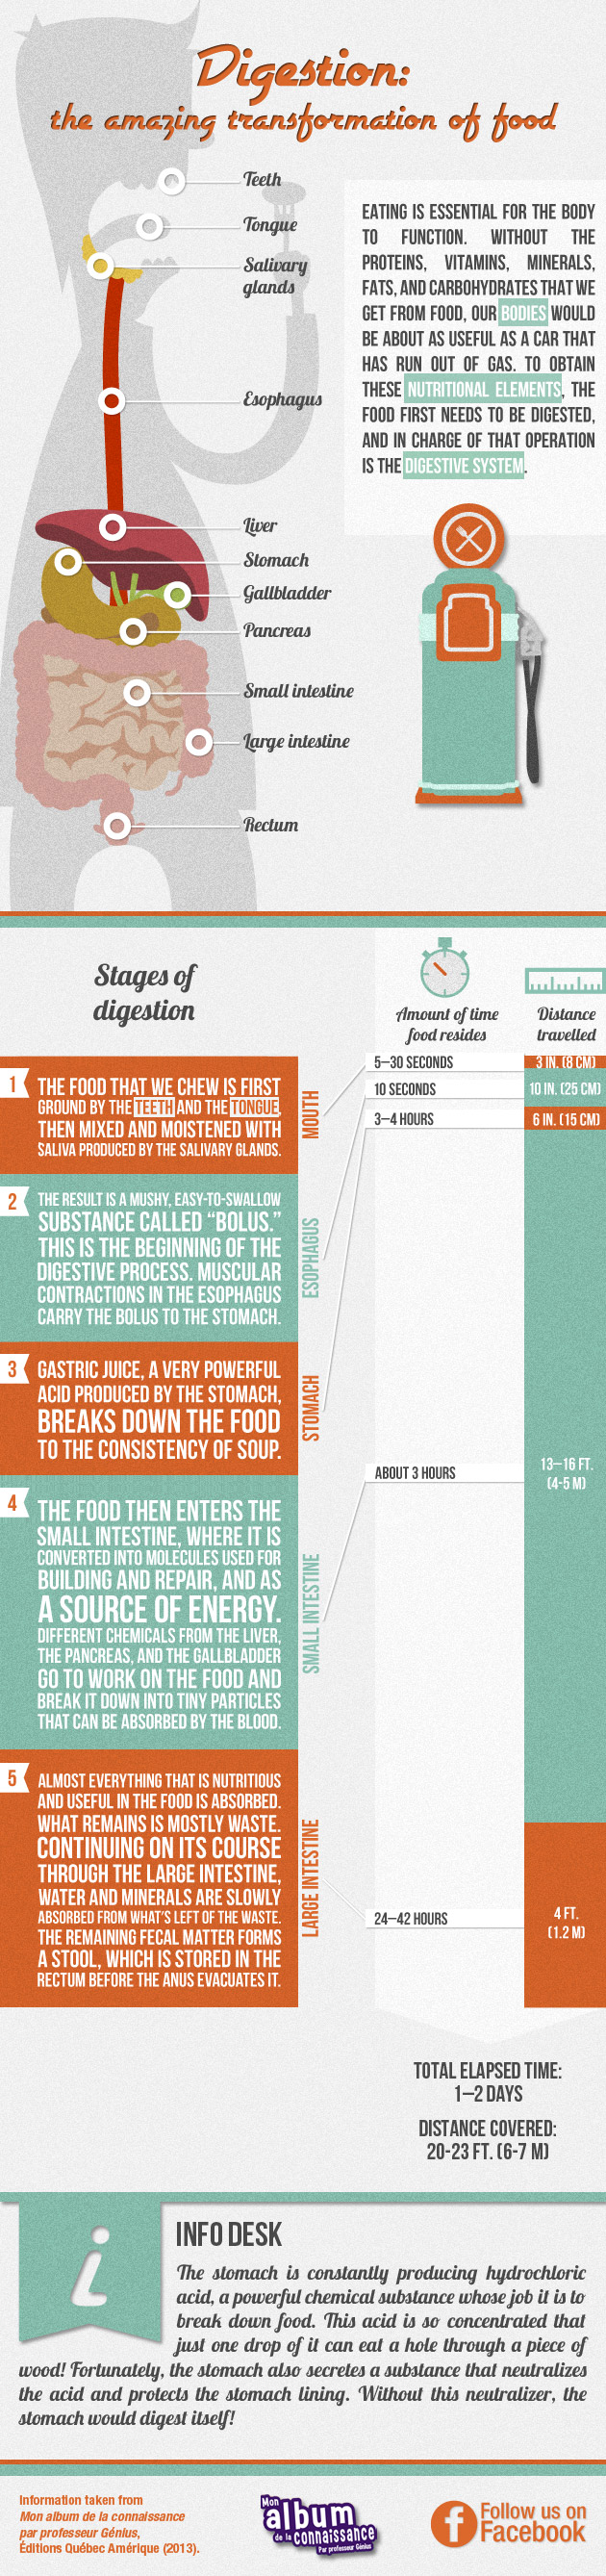 Infographic: Digestion: the amazing transformation of food